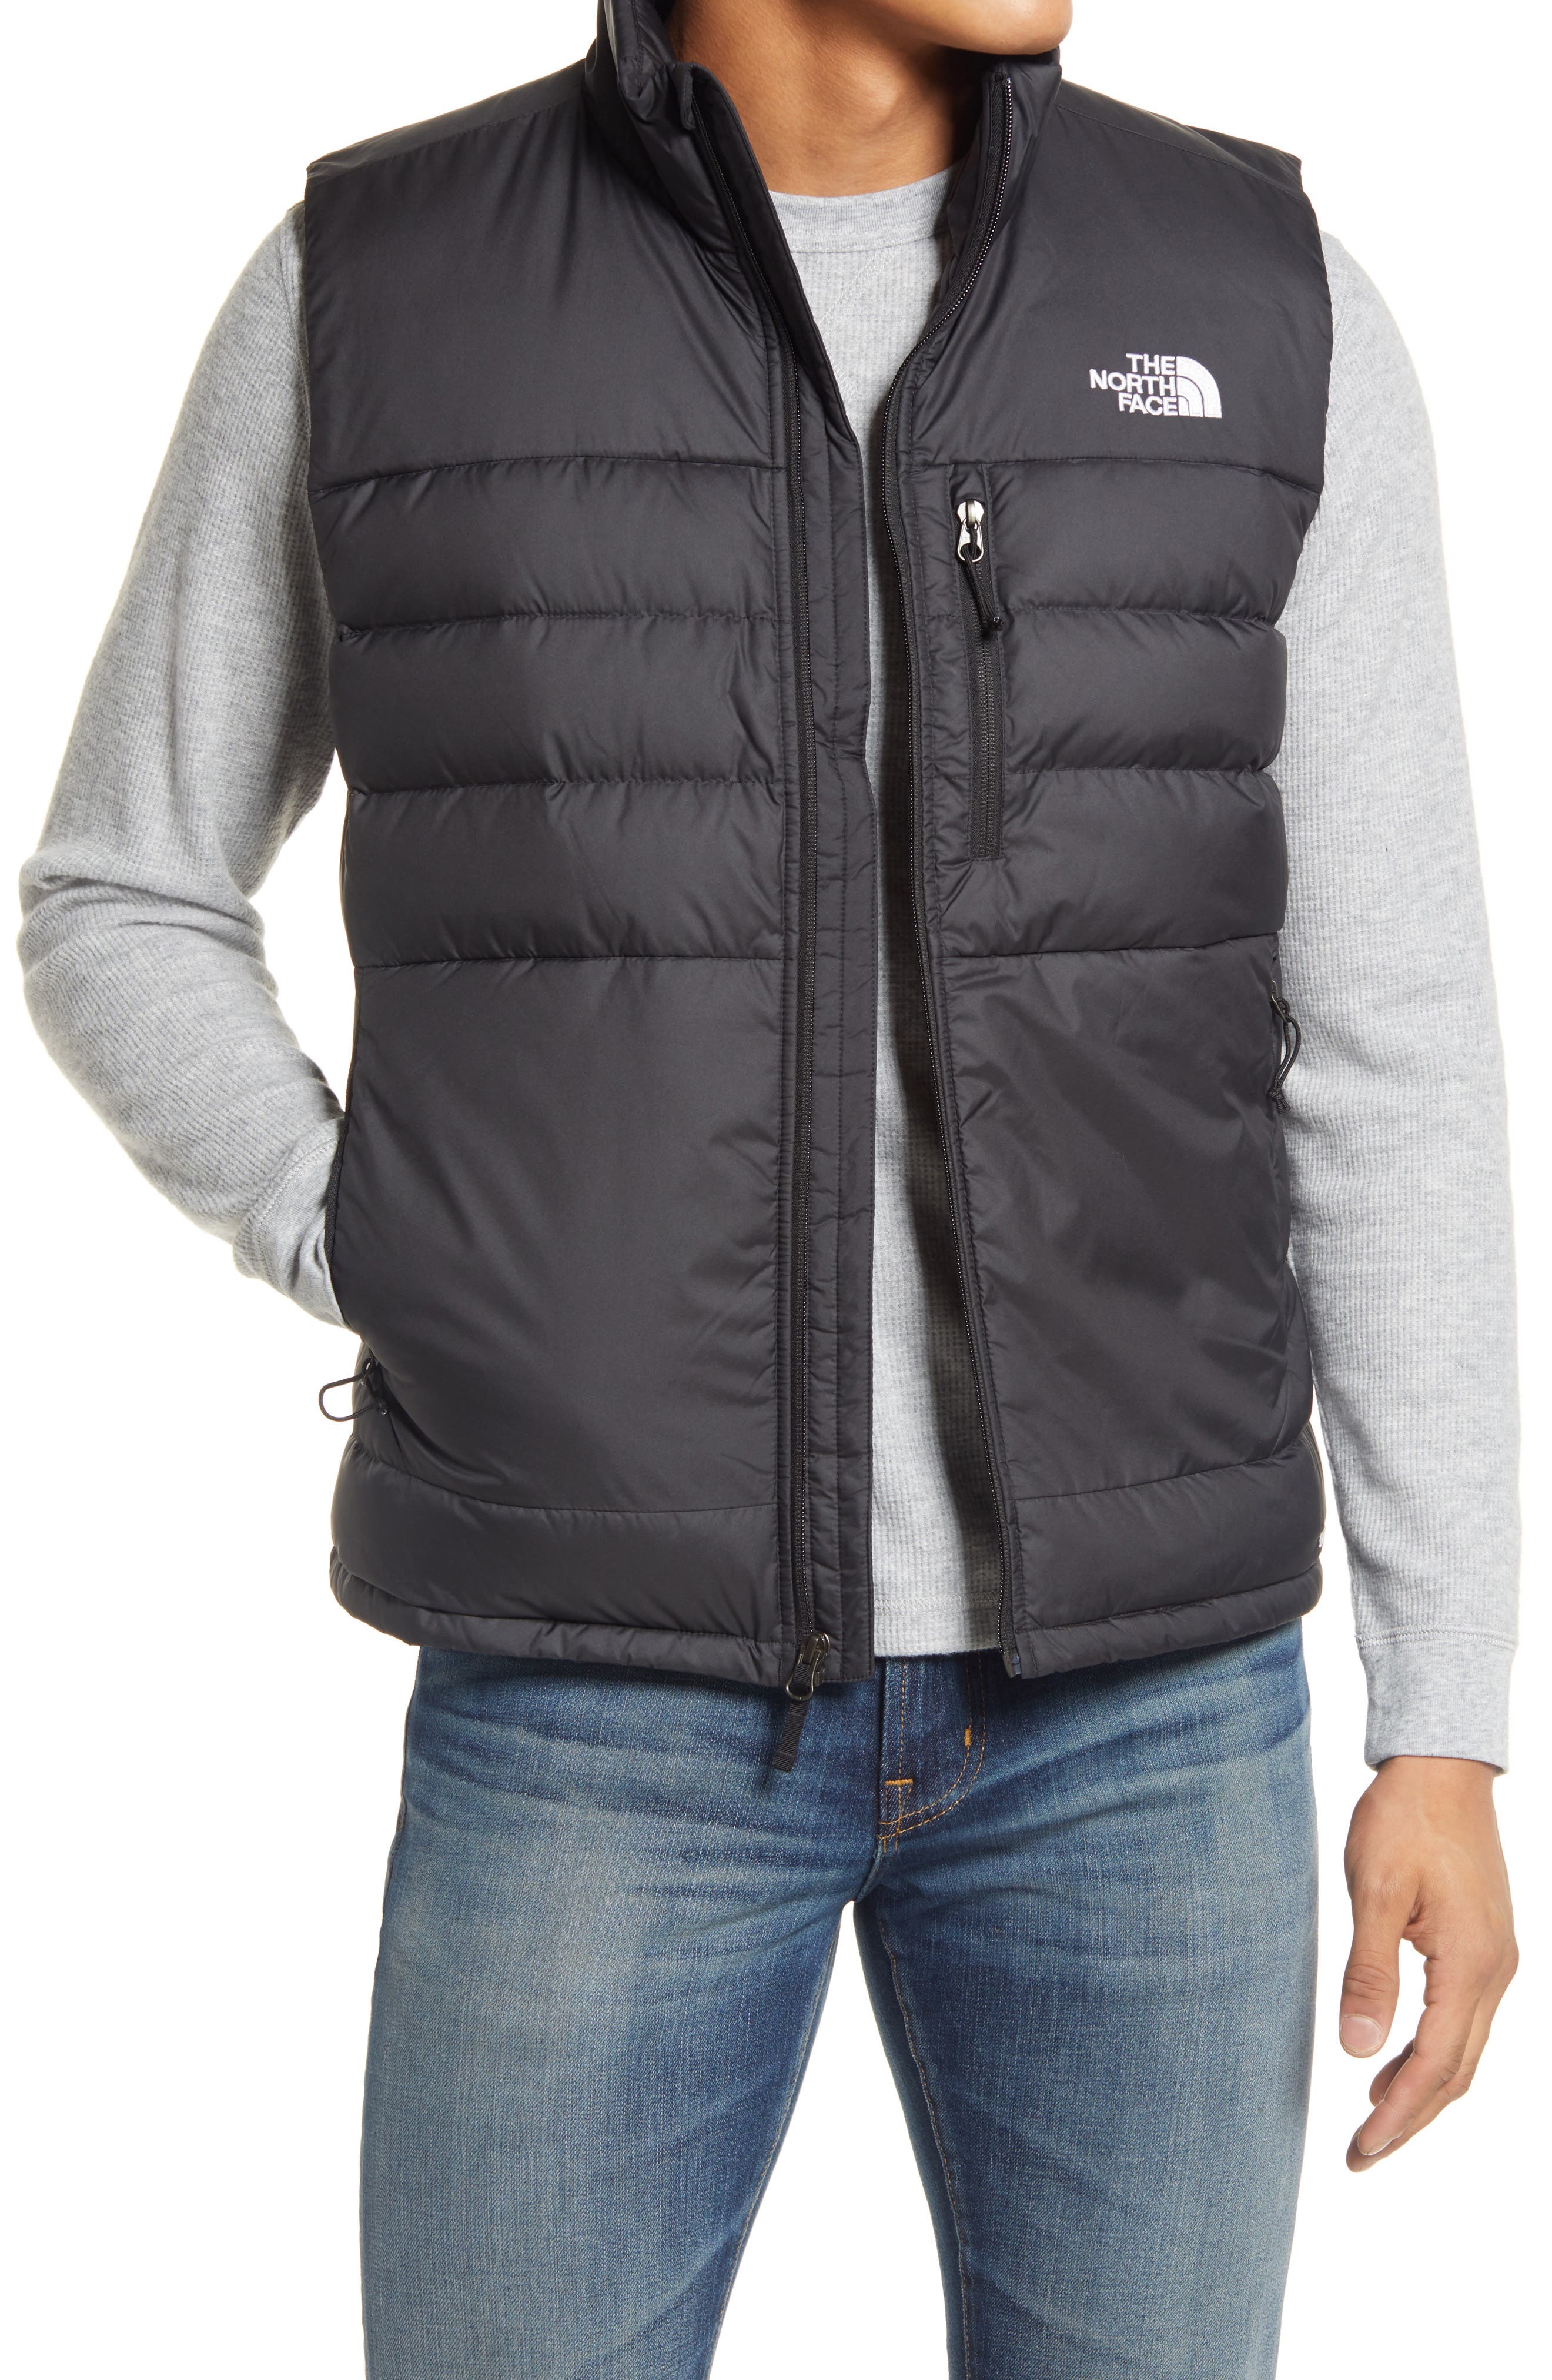 Men's The North Face Clothing Sale 